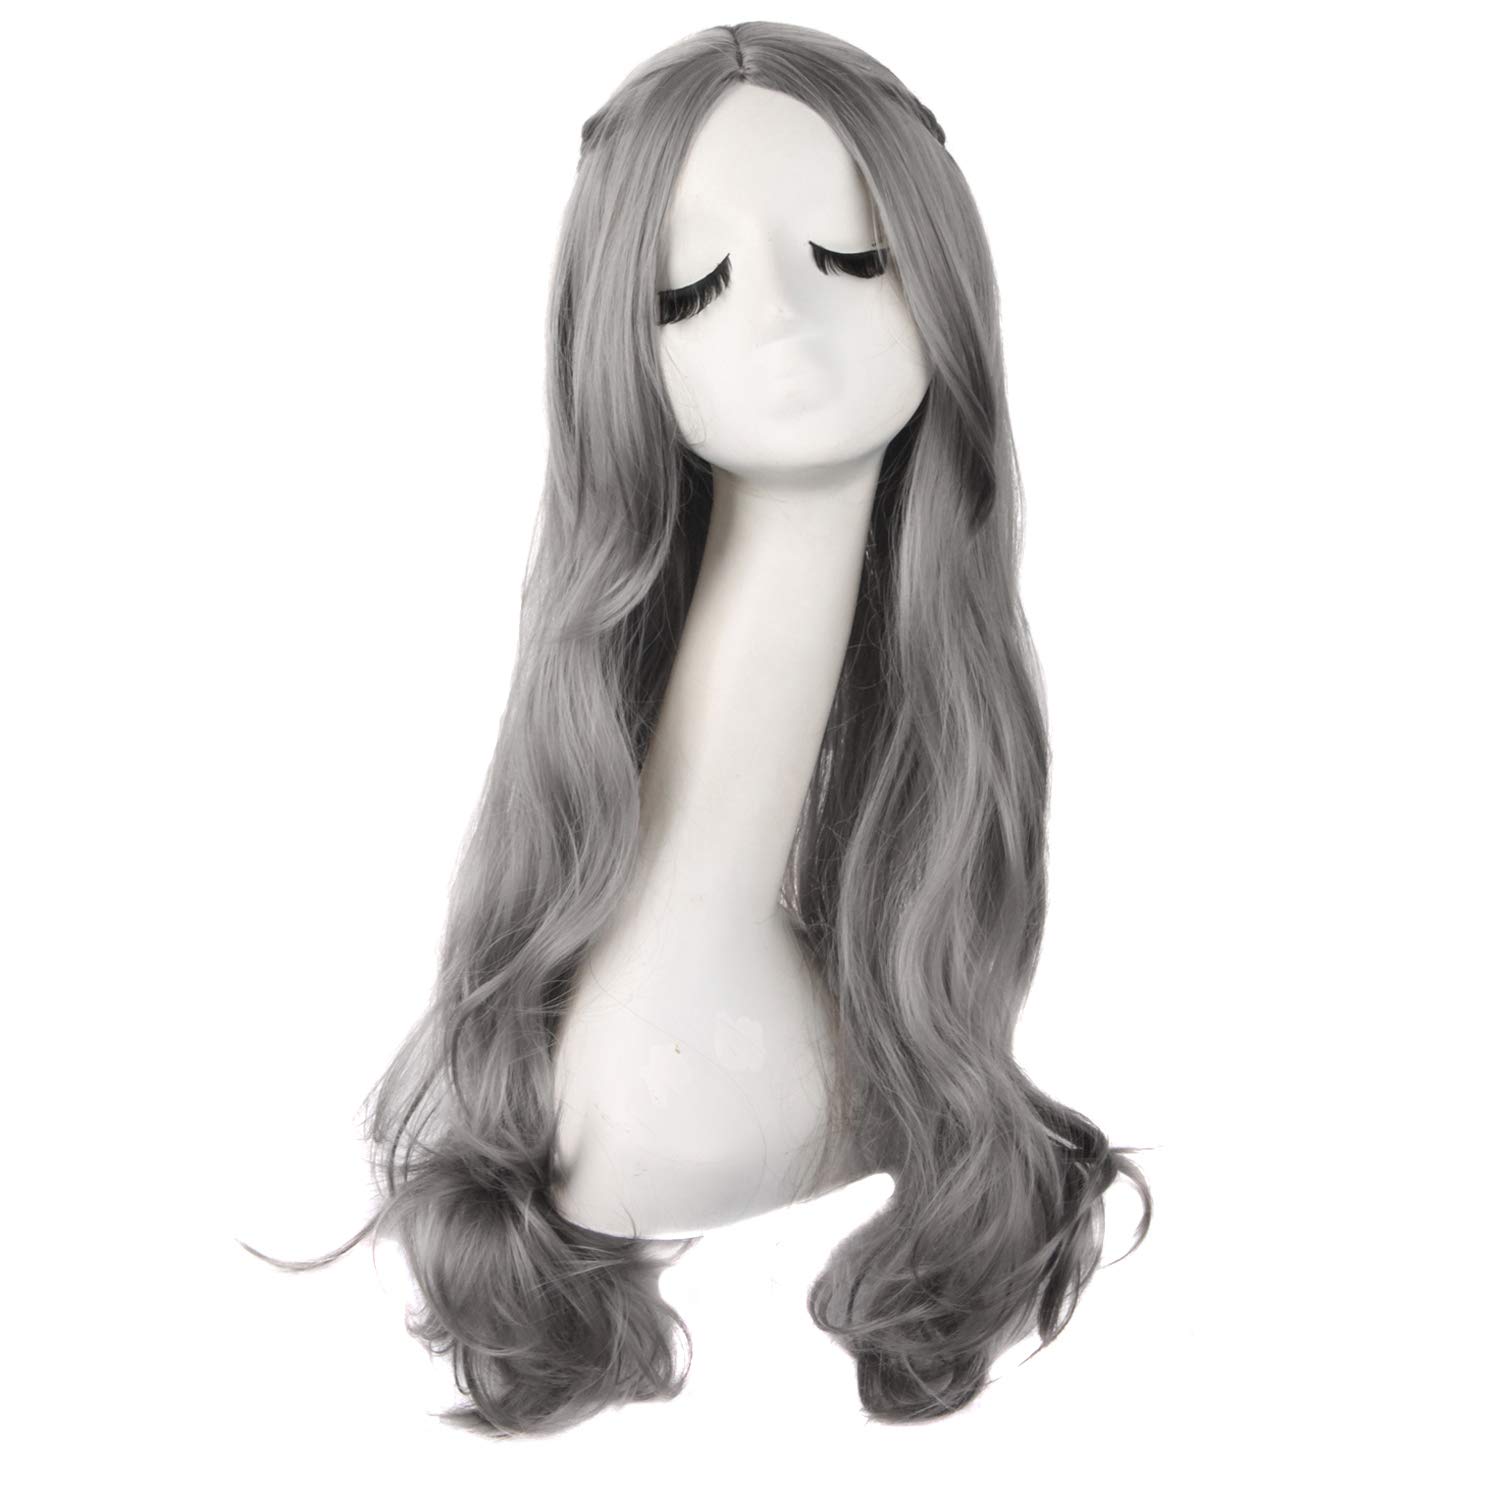 Price:$12.99     MapofBeauty Carve Bangs Beautiful Long Curly Wavy Hair Cosplay Wig (Granny Gray)   Beauty